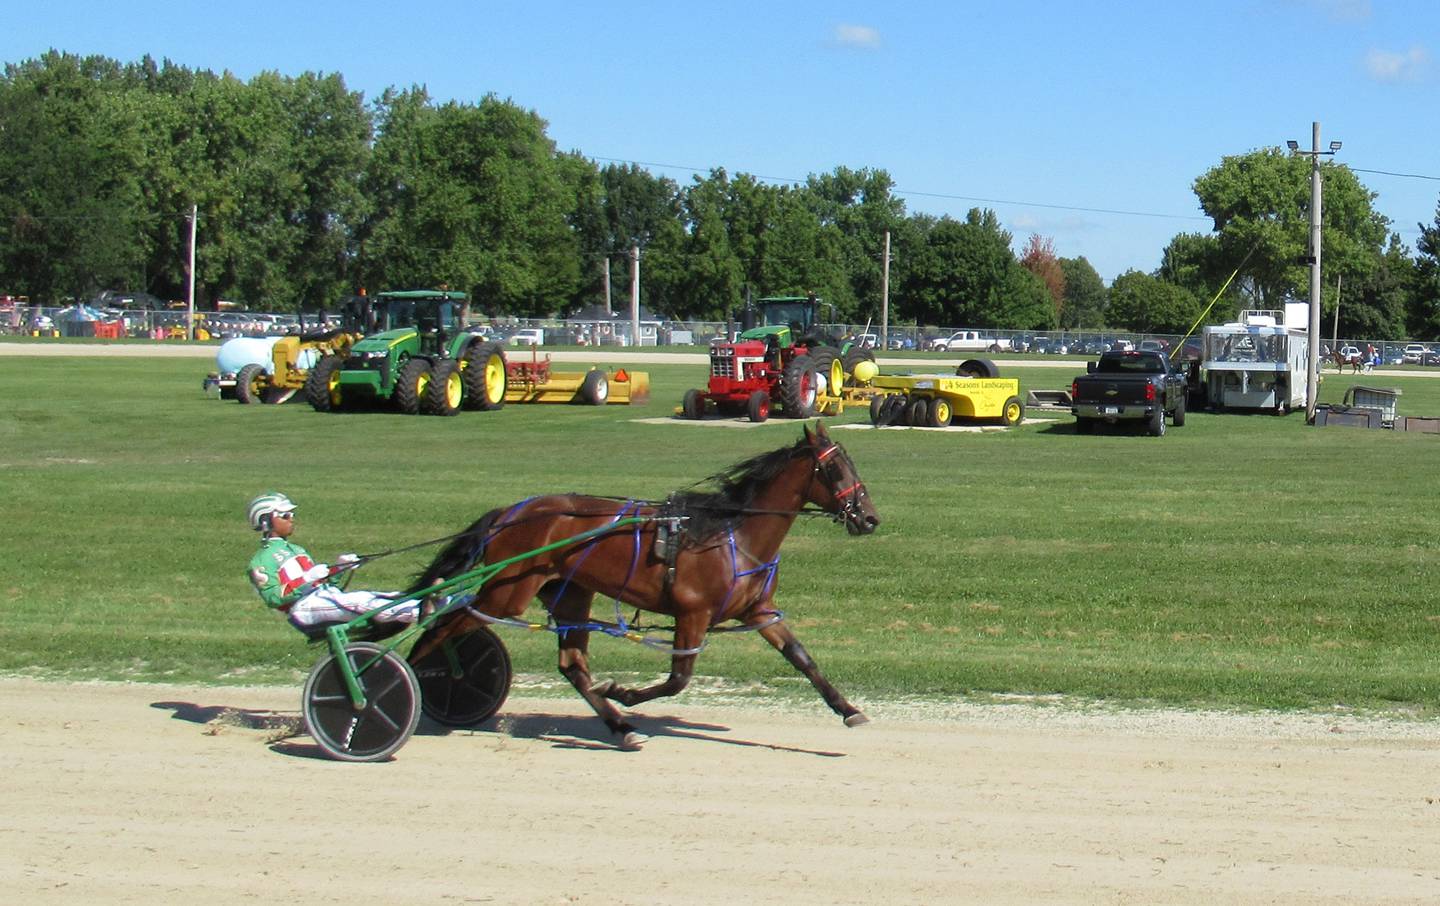 Harness racer at the Sandwich Fair on a warm-up lap before the races started at 11 a.m. on Wednesday, Sept. 7 2022.